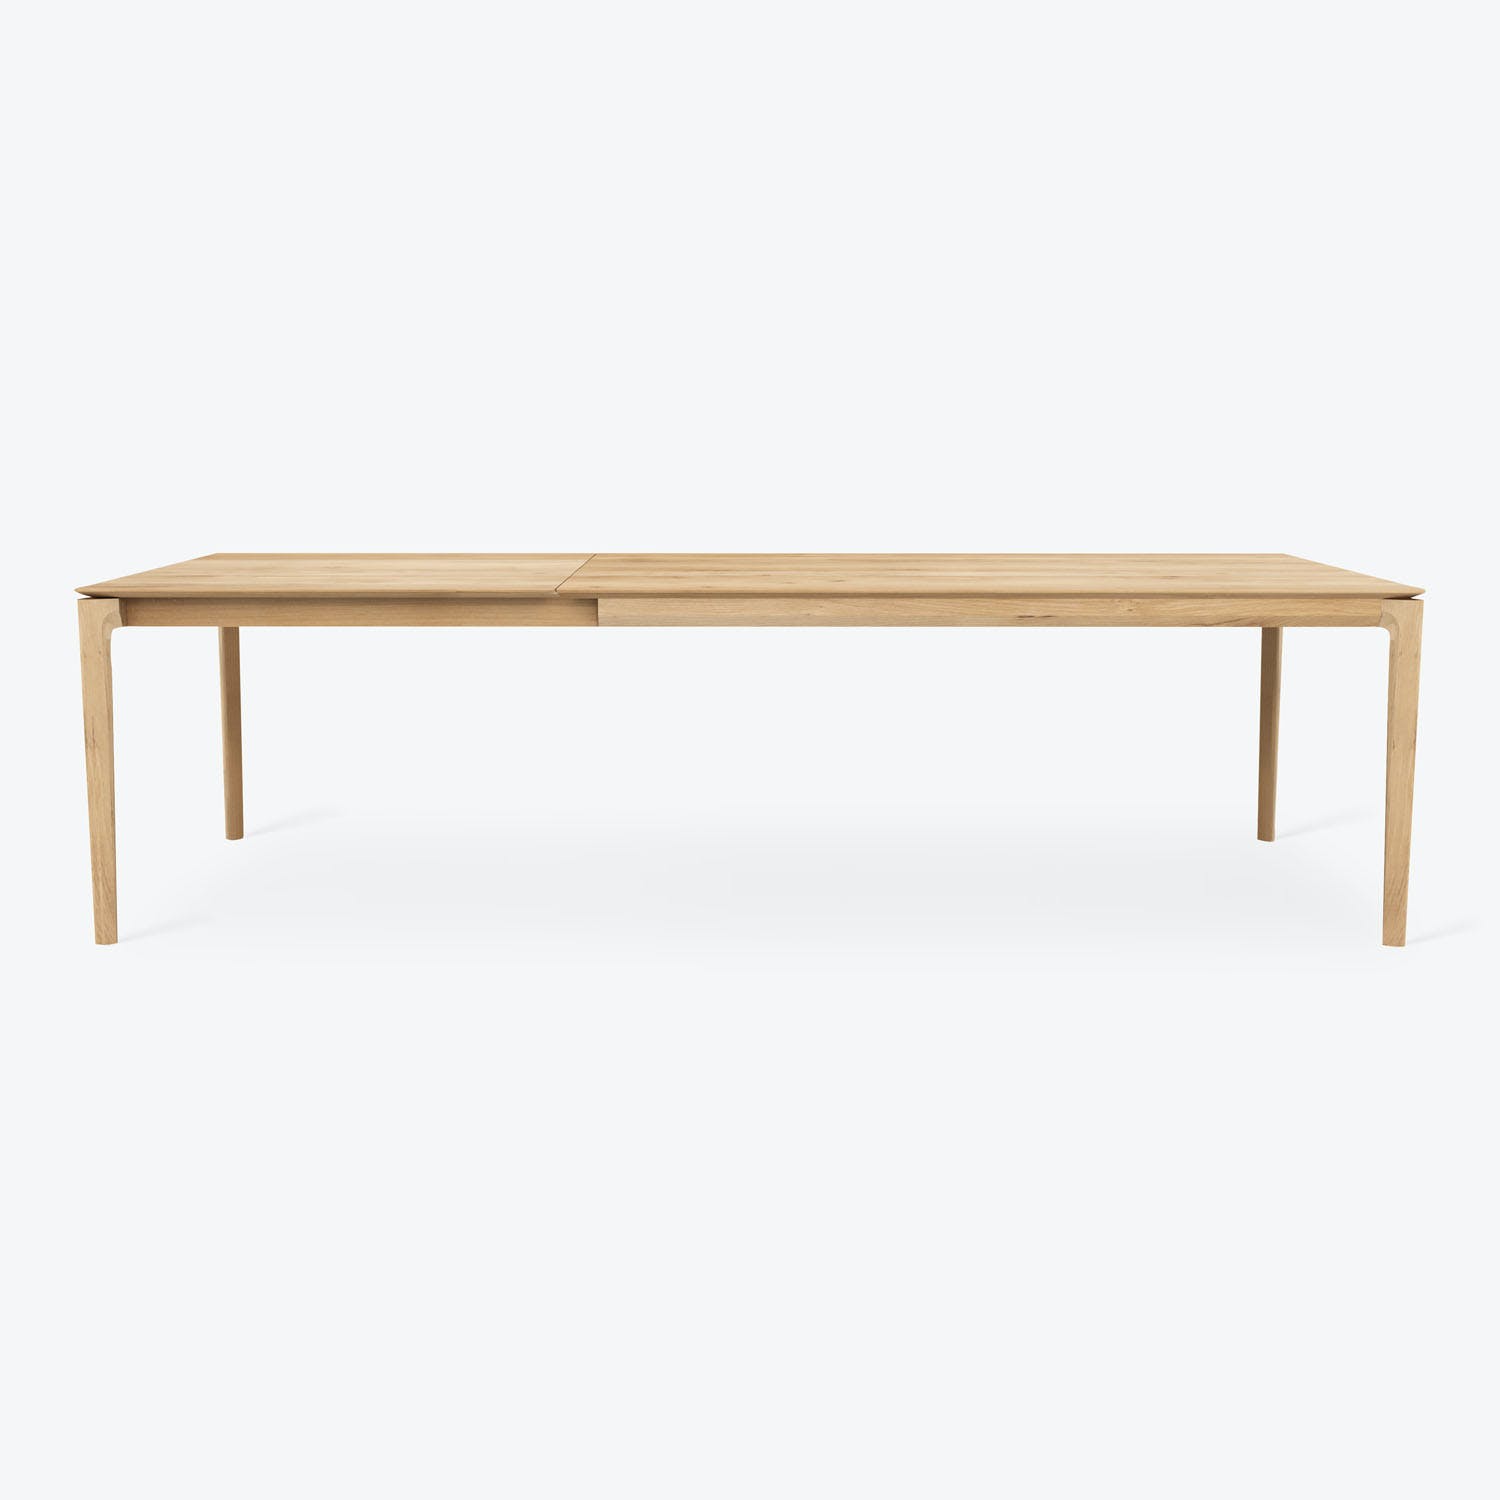 Modern-style dining table with clean lines and light wood finish.